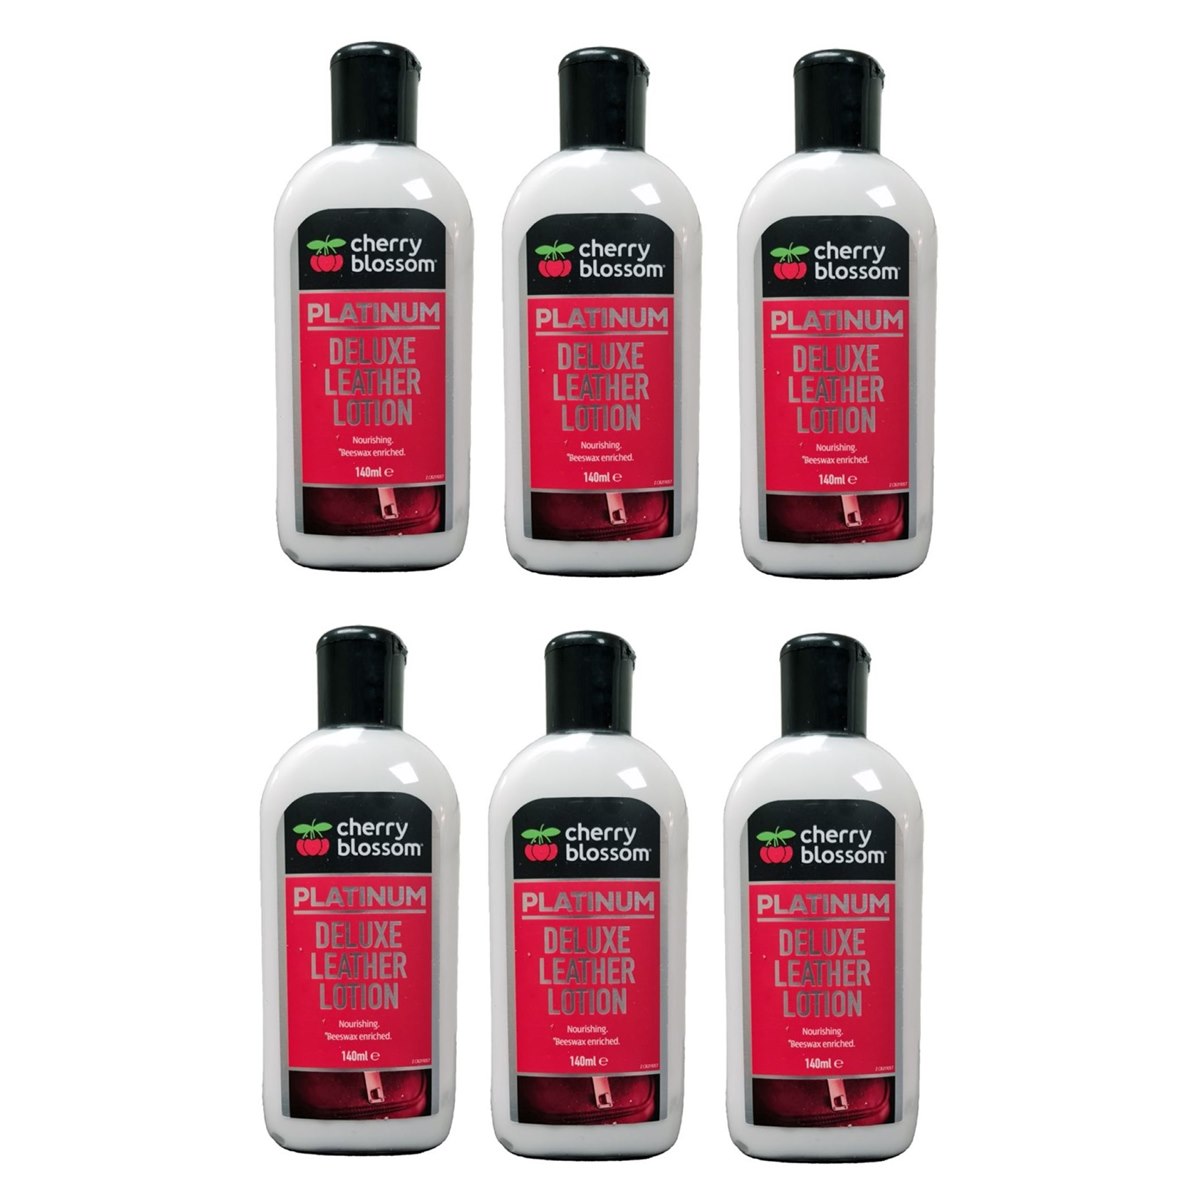 Case of 6 x Cherry Blossom Platinum Deluxe Leather Lotion 140ml